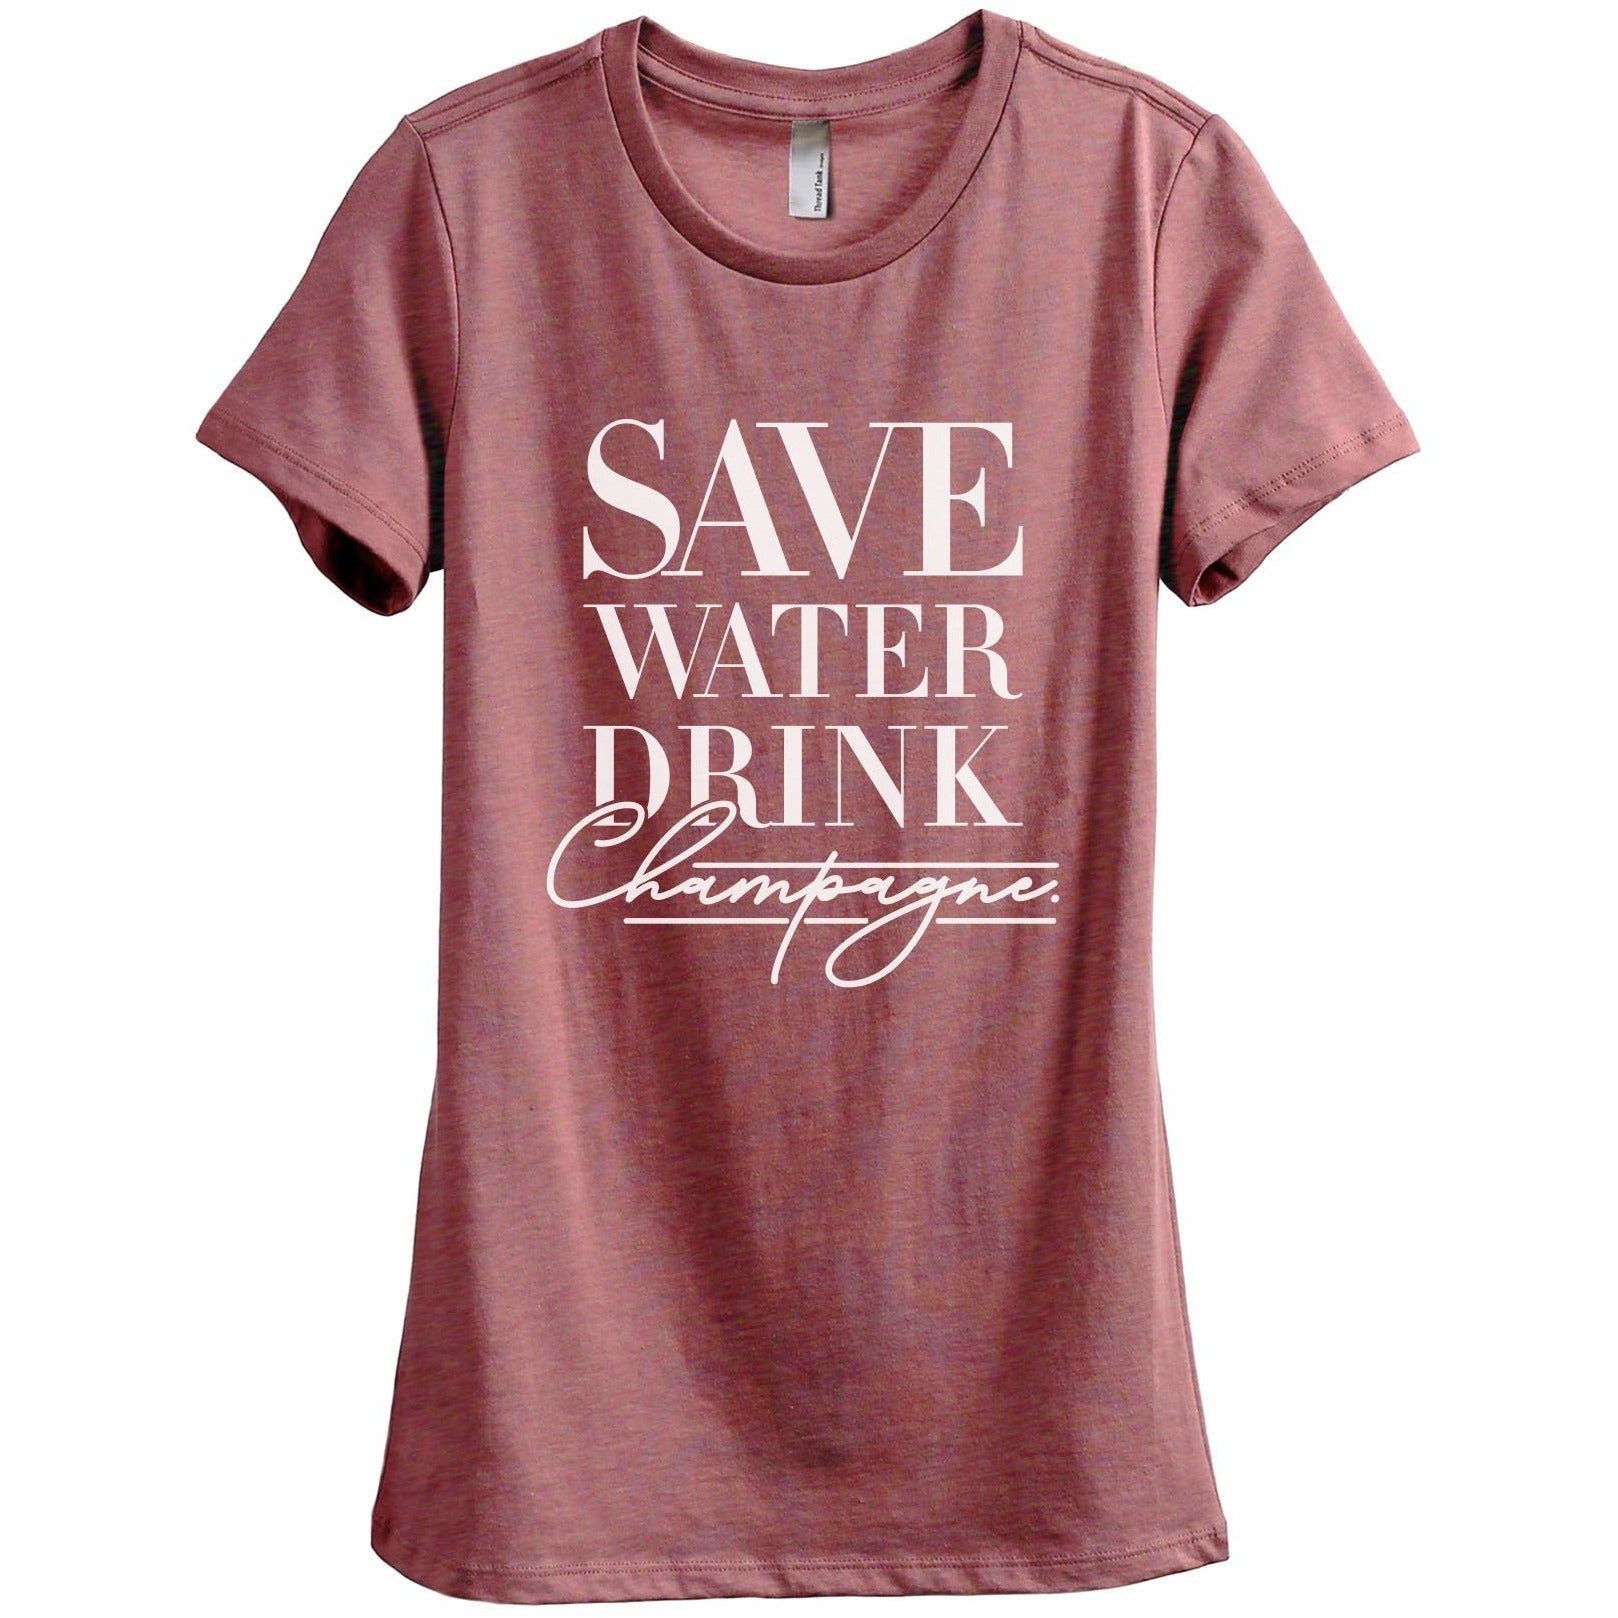 Save Water Drink Champagne Women's Relaxed Crewneck T-Shirt Top Tee Heather Rouge
